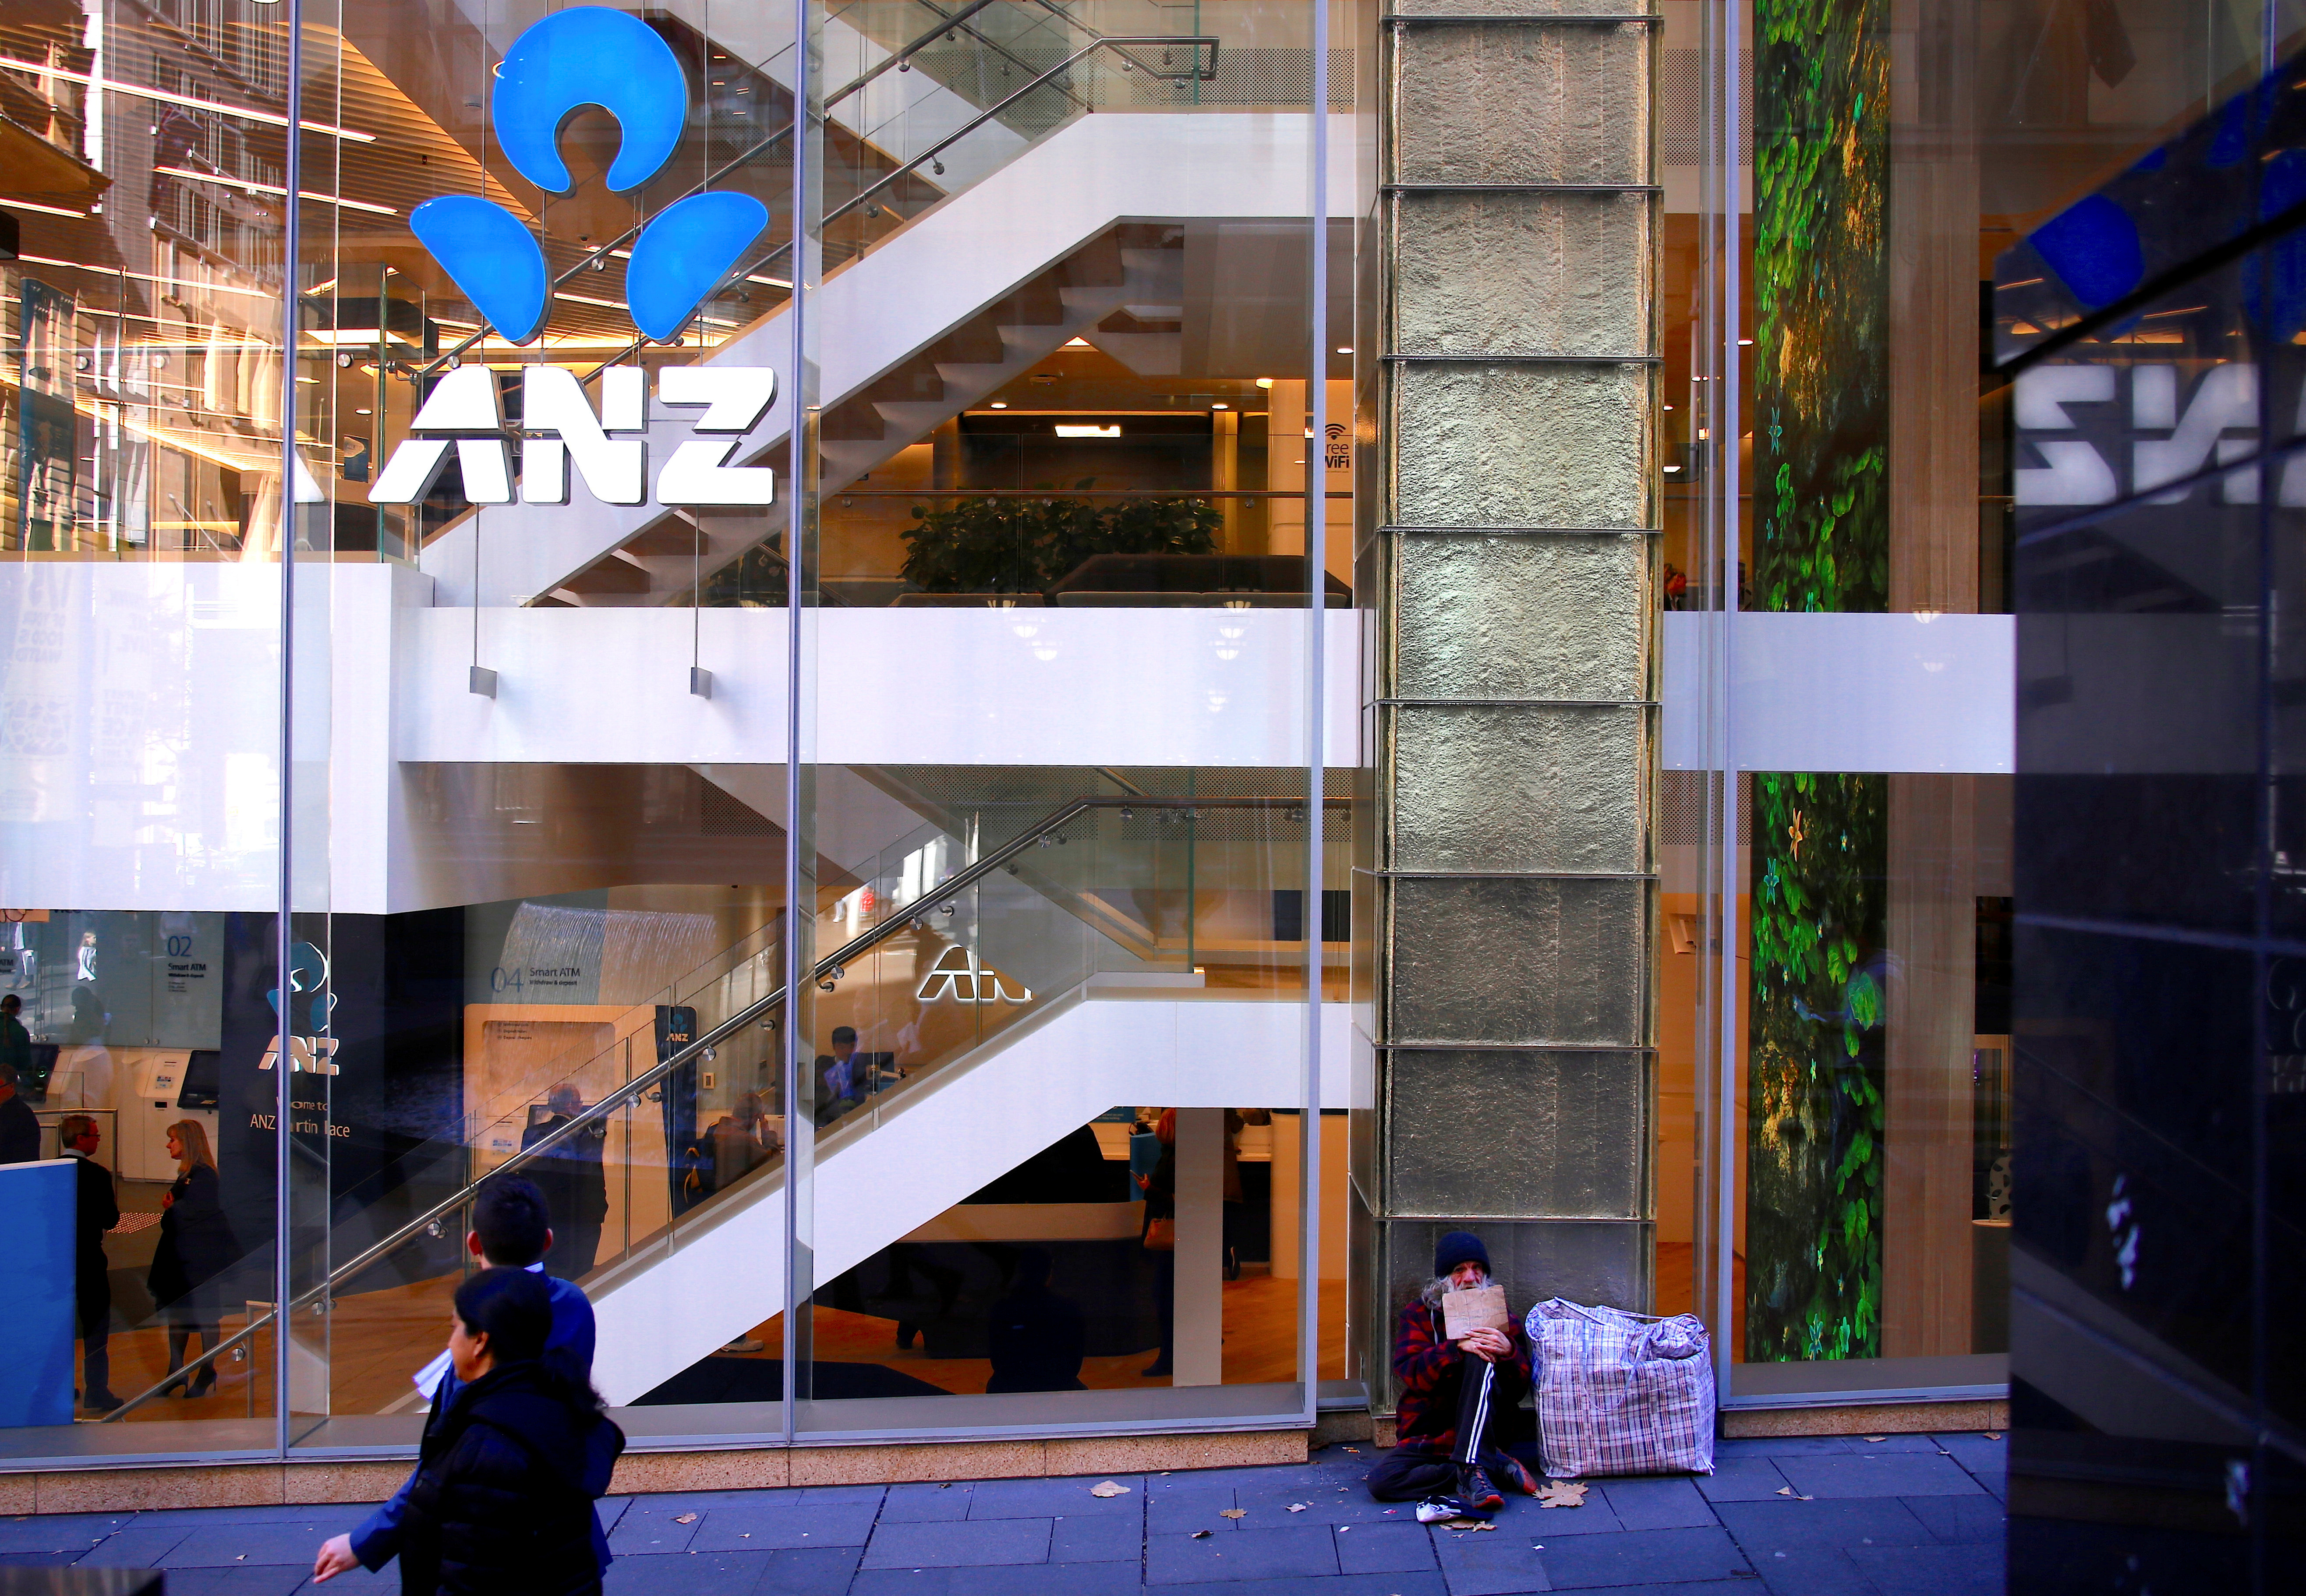 A man who says he is homeless for over 30 years begs for money as he sits outside a branch of the ANZ Banking Group in central Sydney, Australia